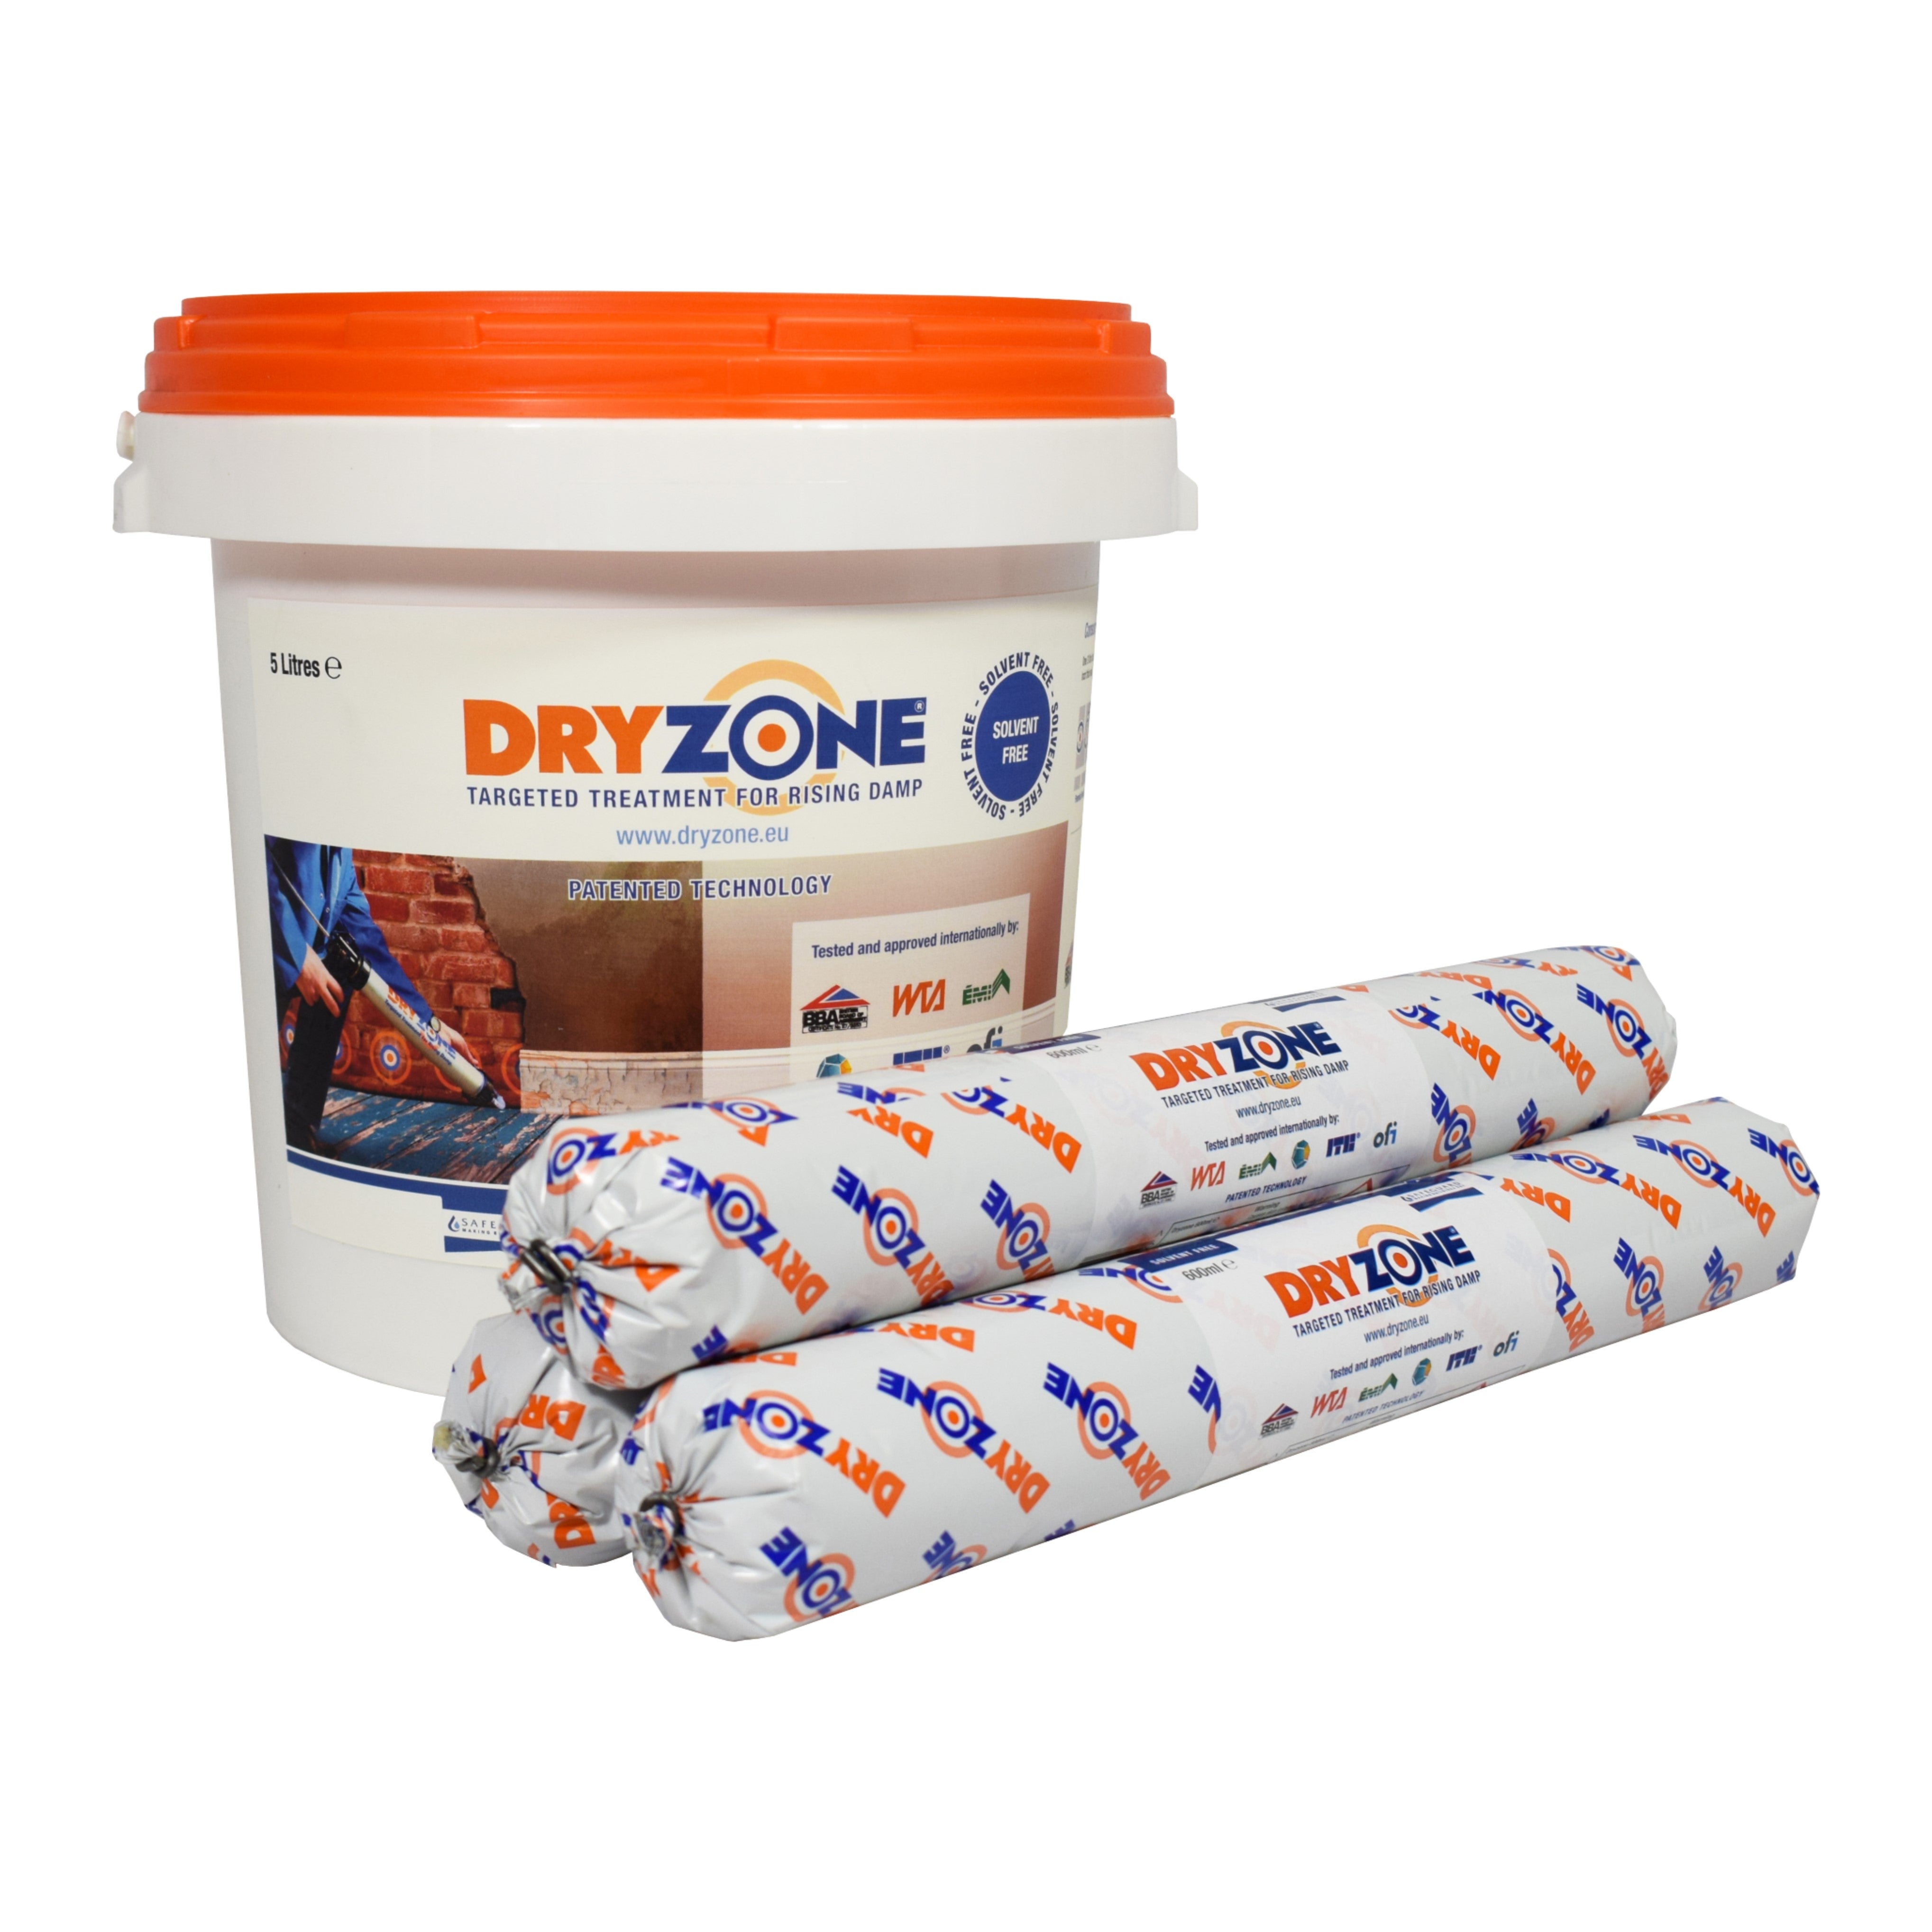 dryzone damp proofing instructions